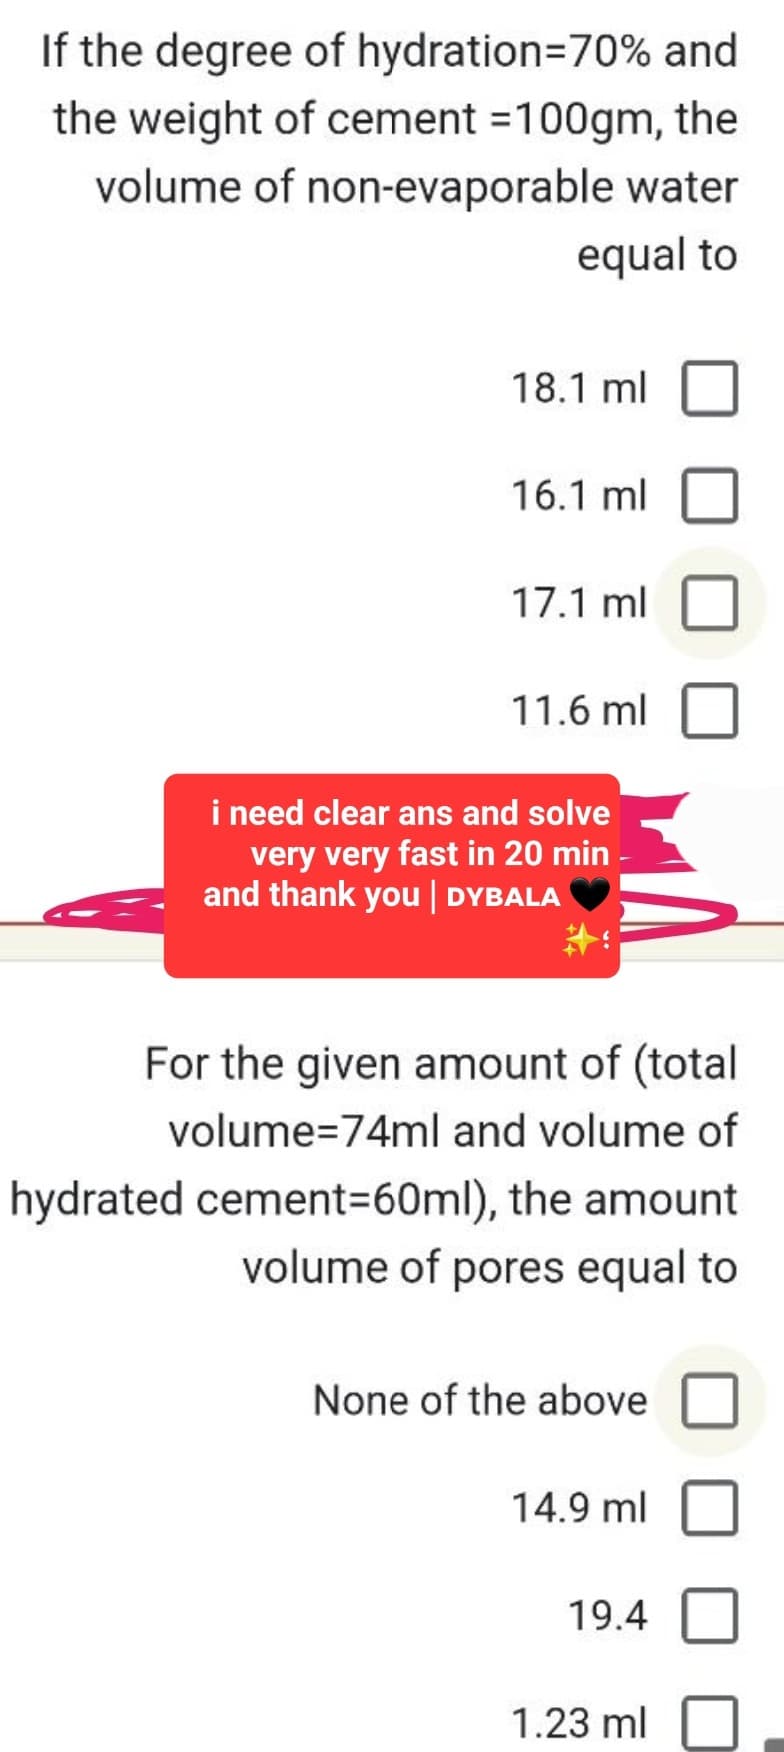 If the degree of hydration=70% and
the weight of cement =100gm, the
volume of non-evaporable water
equal to
18.1 ml
16.1 ml
17.1 ml
11.6 ml
i need clear ans and solve
very very fast in 20 min -
and thank you | DYBALA
For the given amount of (total
volume=74ml and volume of
hydrated cement=60ml), the amount
volume of pores equal to
None of the above
14.9 ml
19.4
1.23 ml